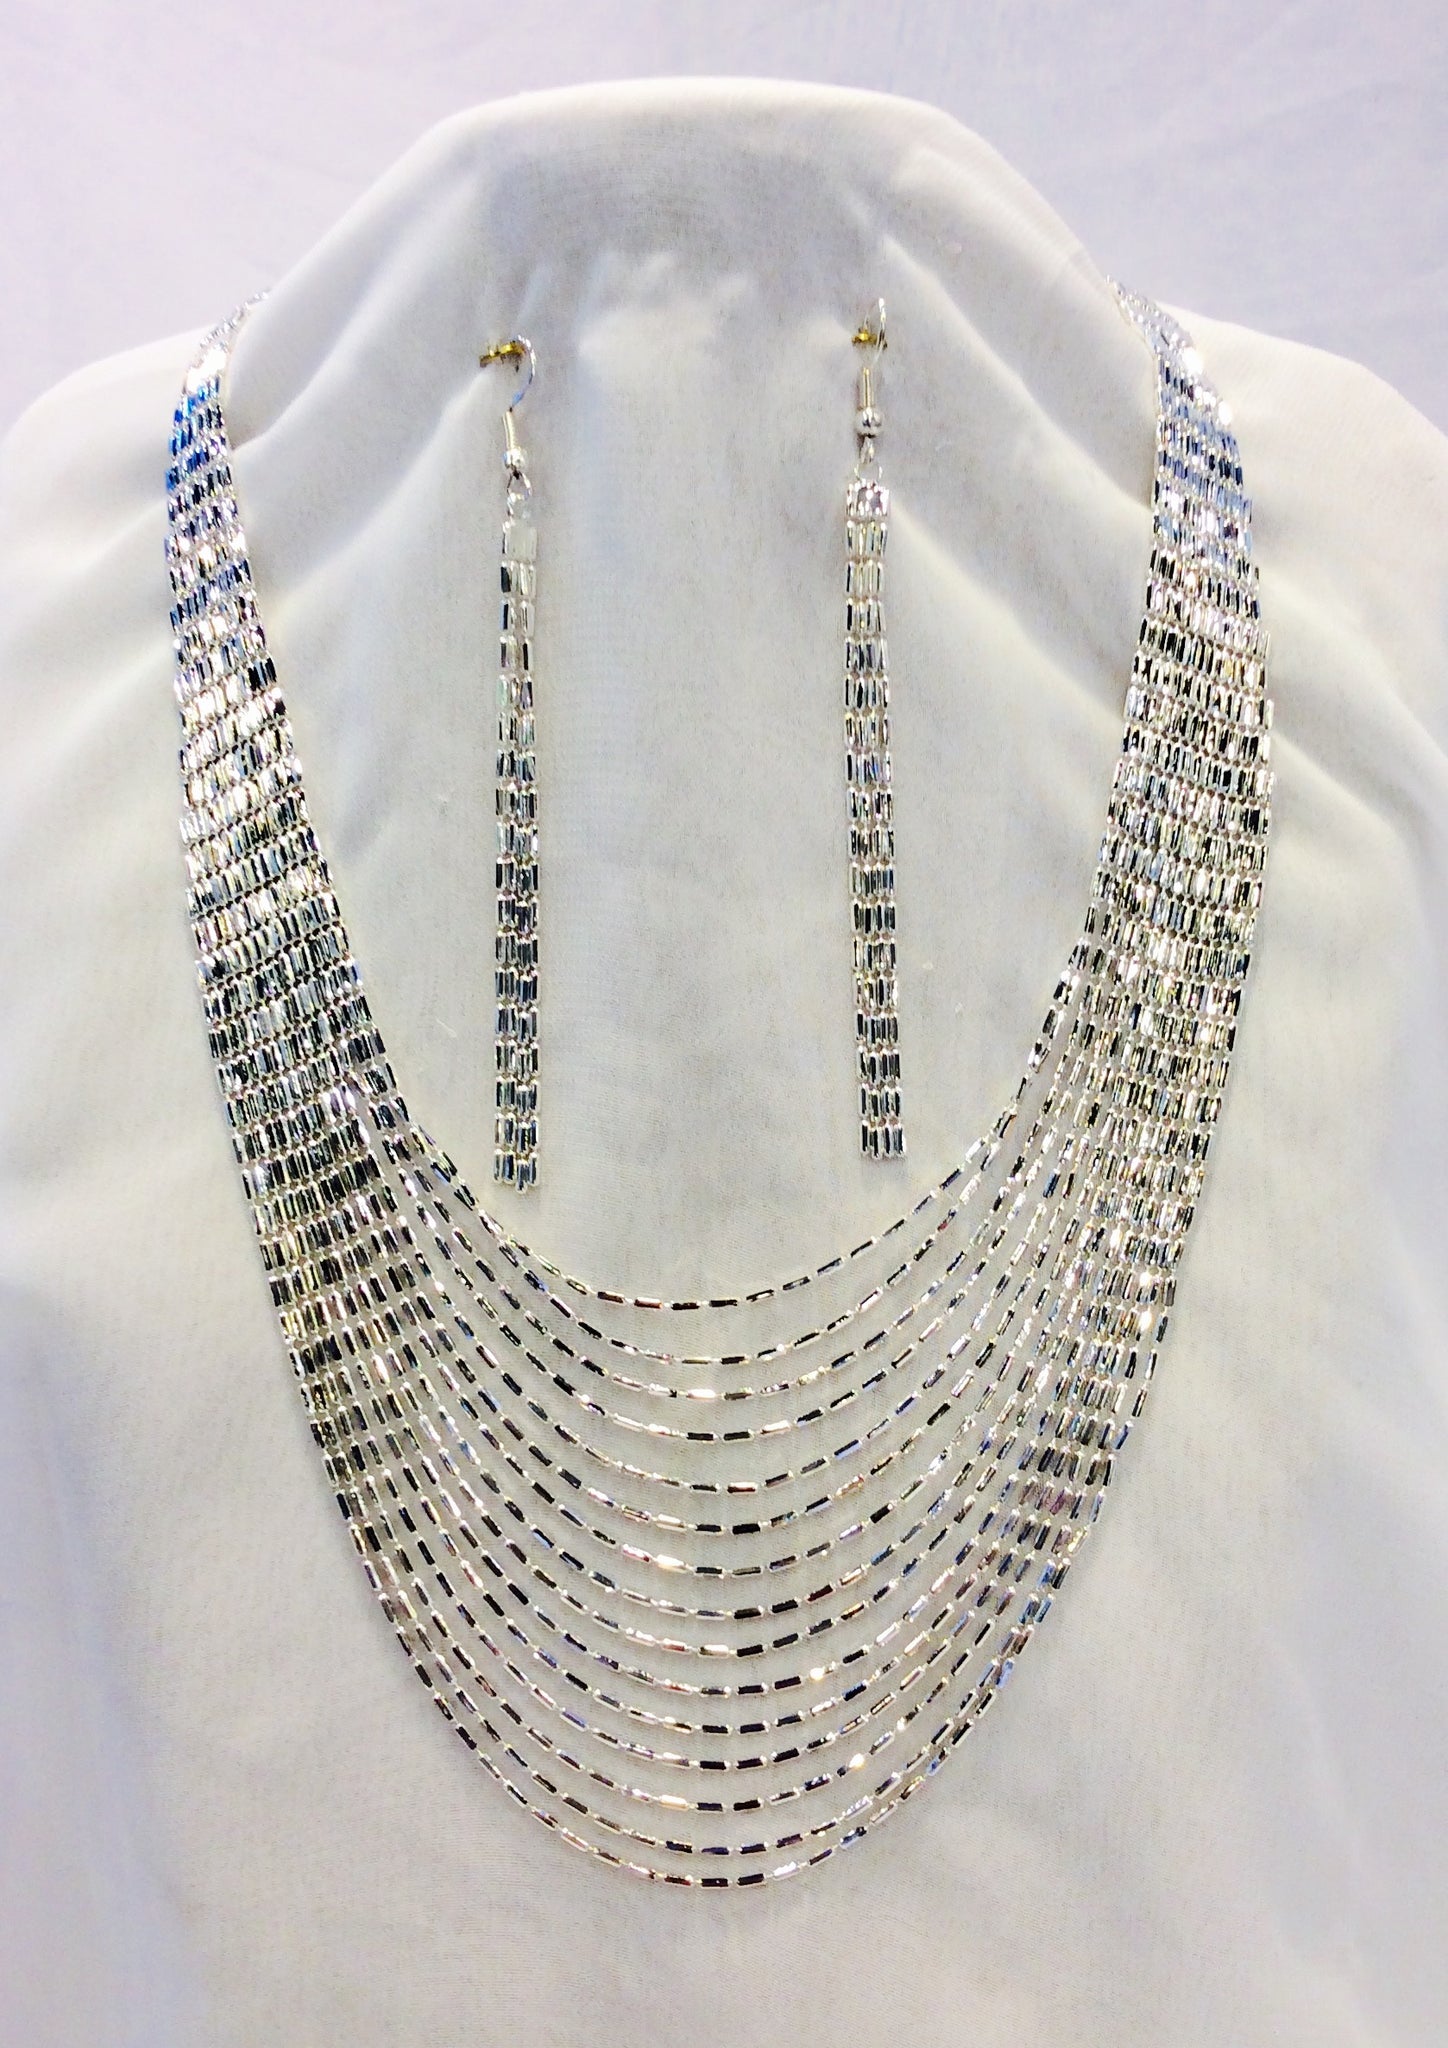 15 Chains Necklace and Earrings set#66-14112S